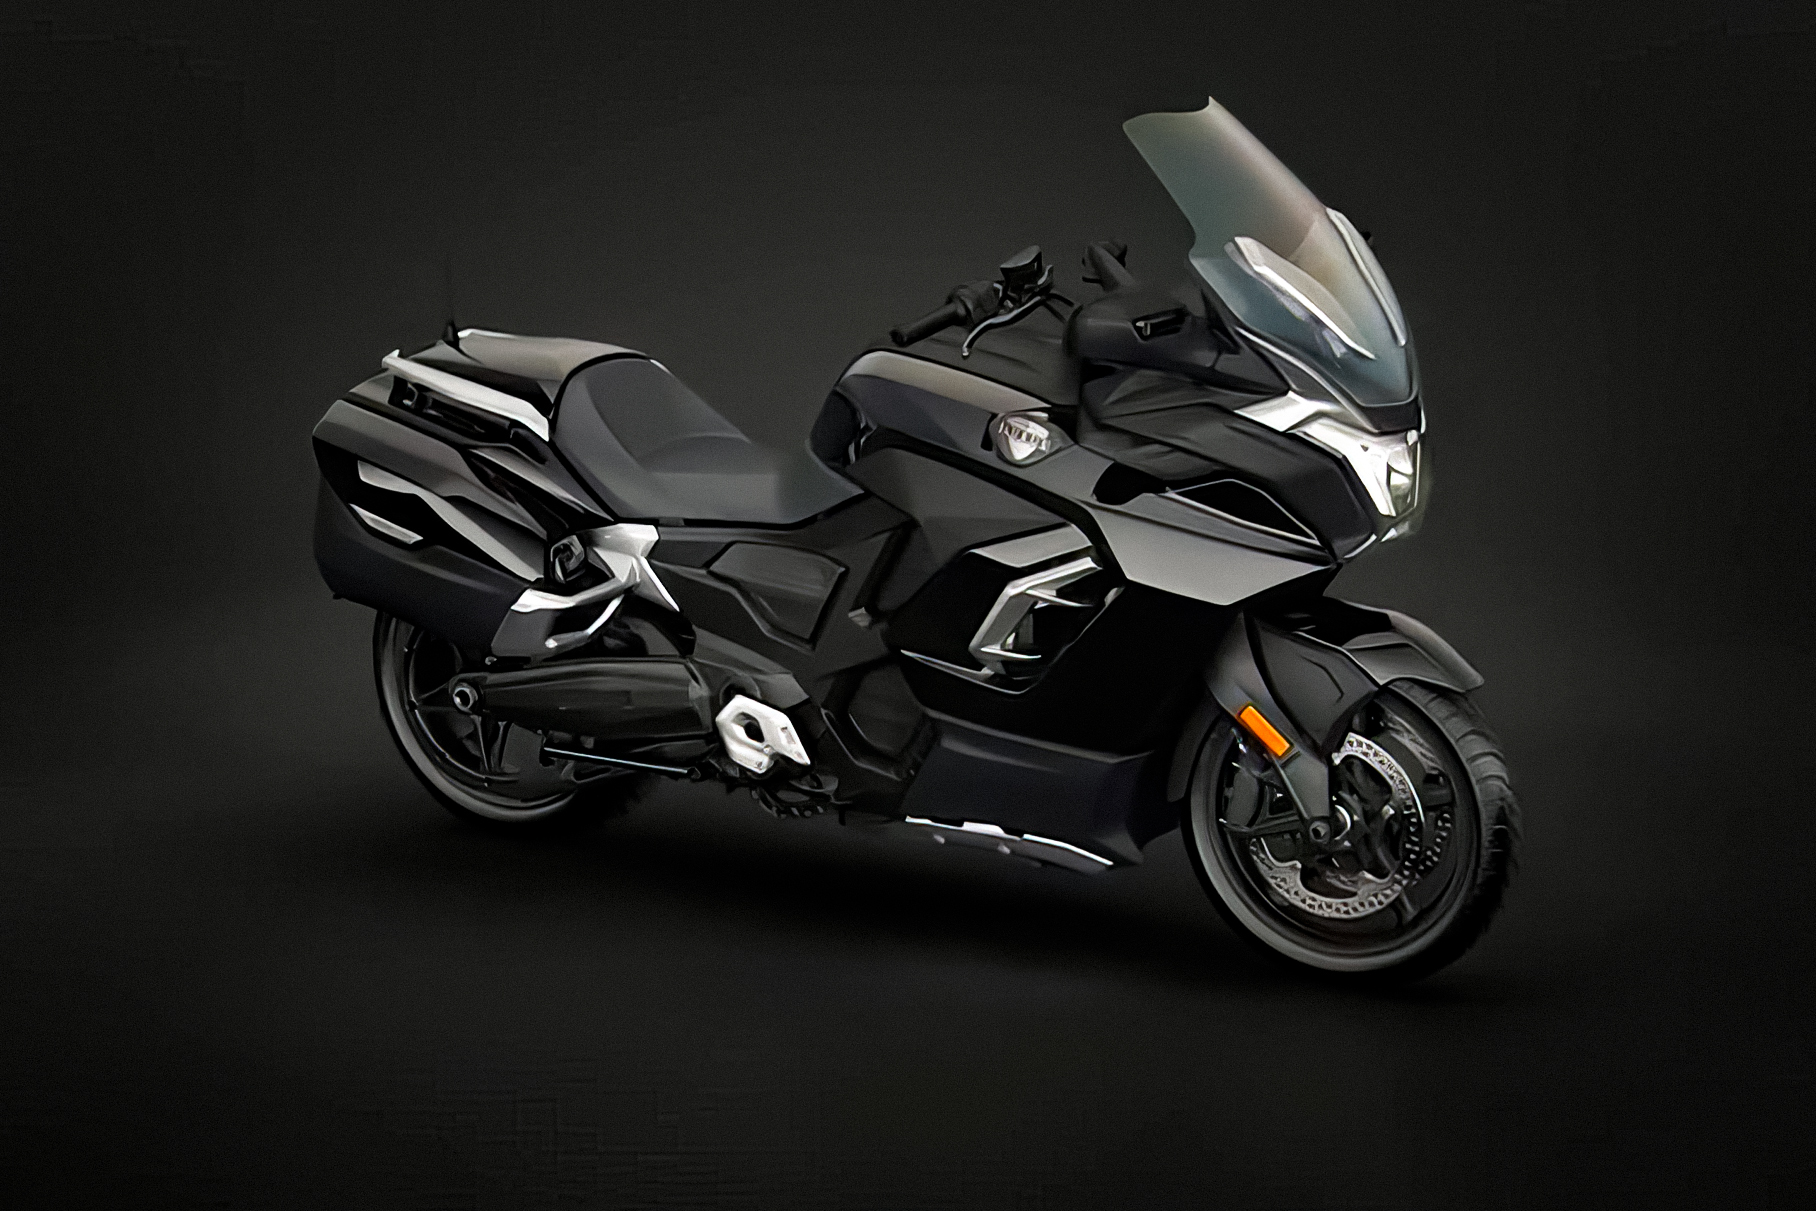 A new release date for the Aurus Merlon electric motorcycle has been announced